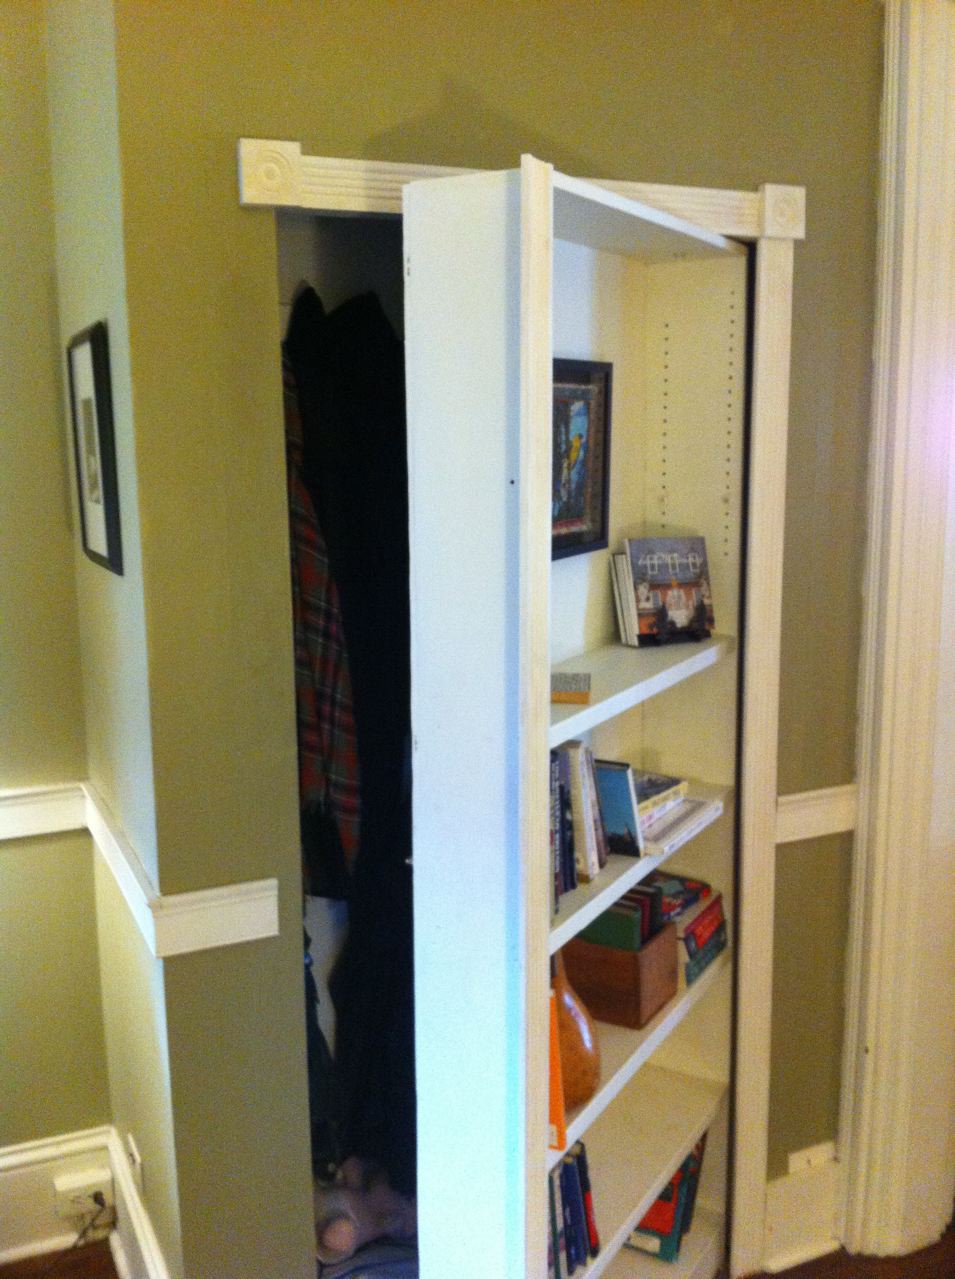 The Mysterious Bookcase